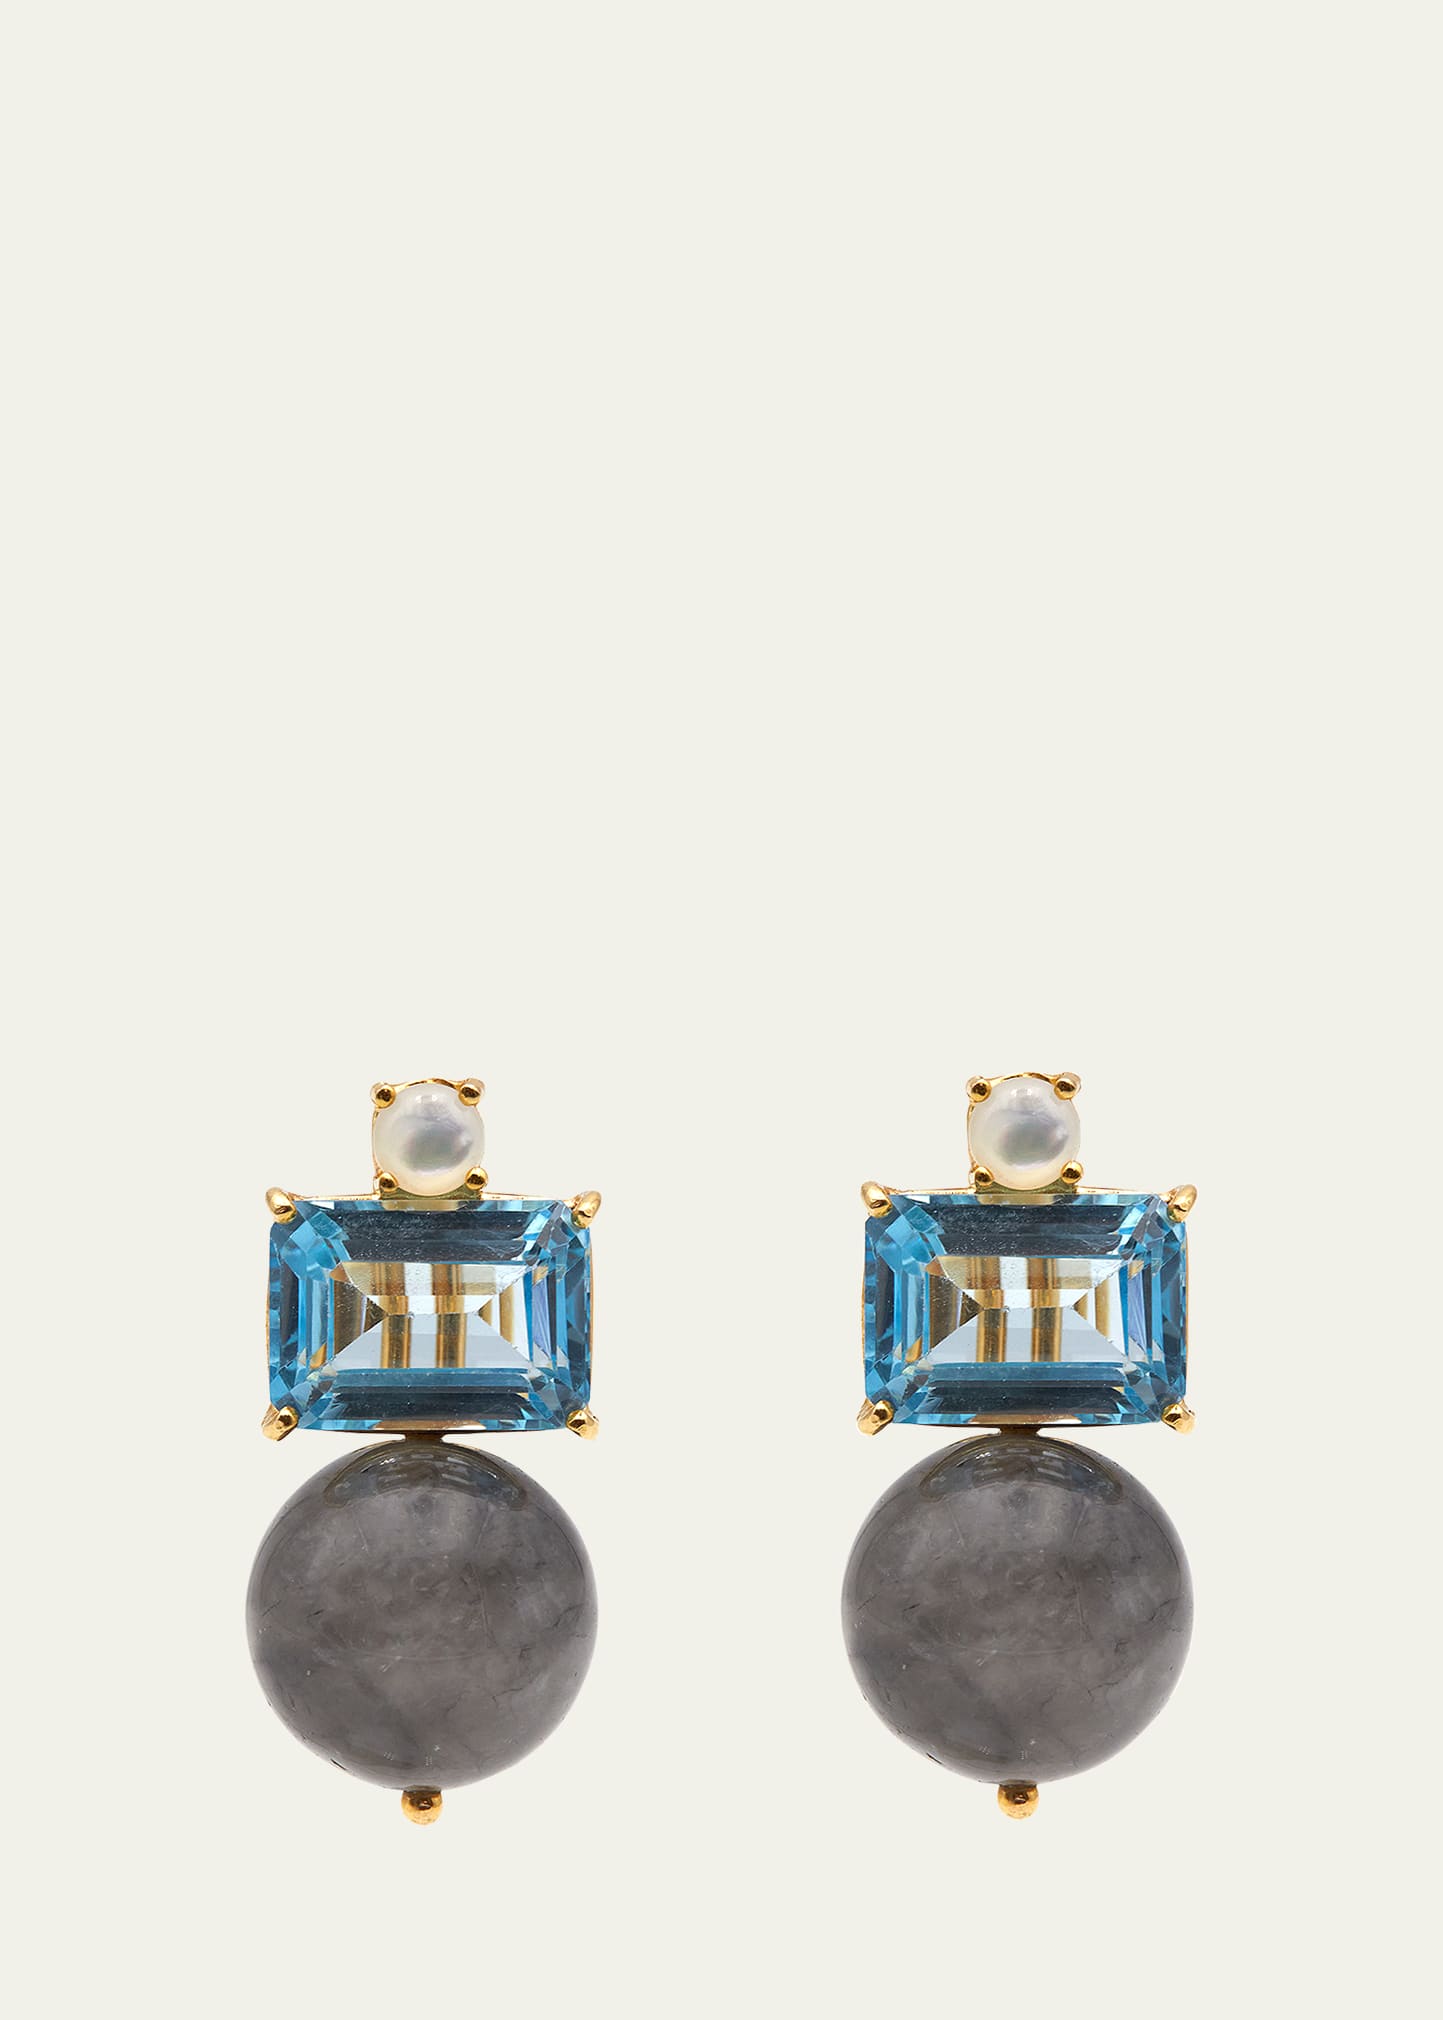 Grazia And Marica Vozza 14K Yellow Gold Stud Earrings with Labradorite, Blue Quartz and Mother-of-Pearl